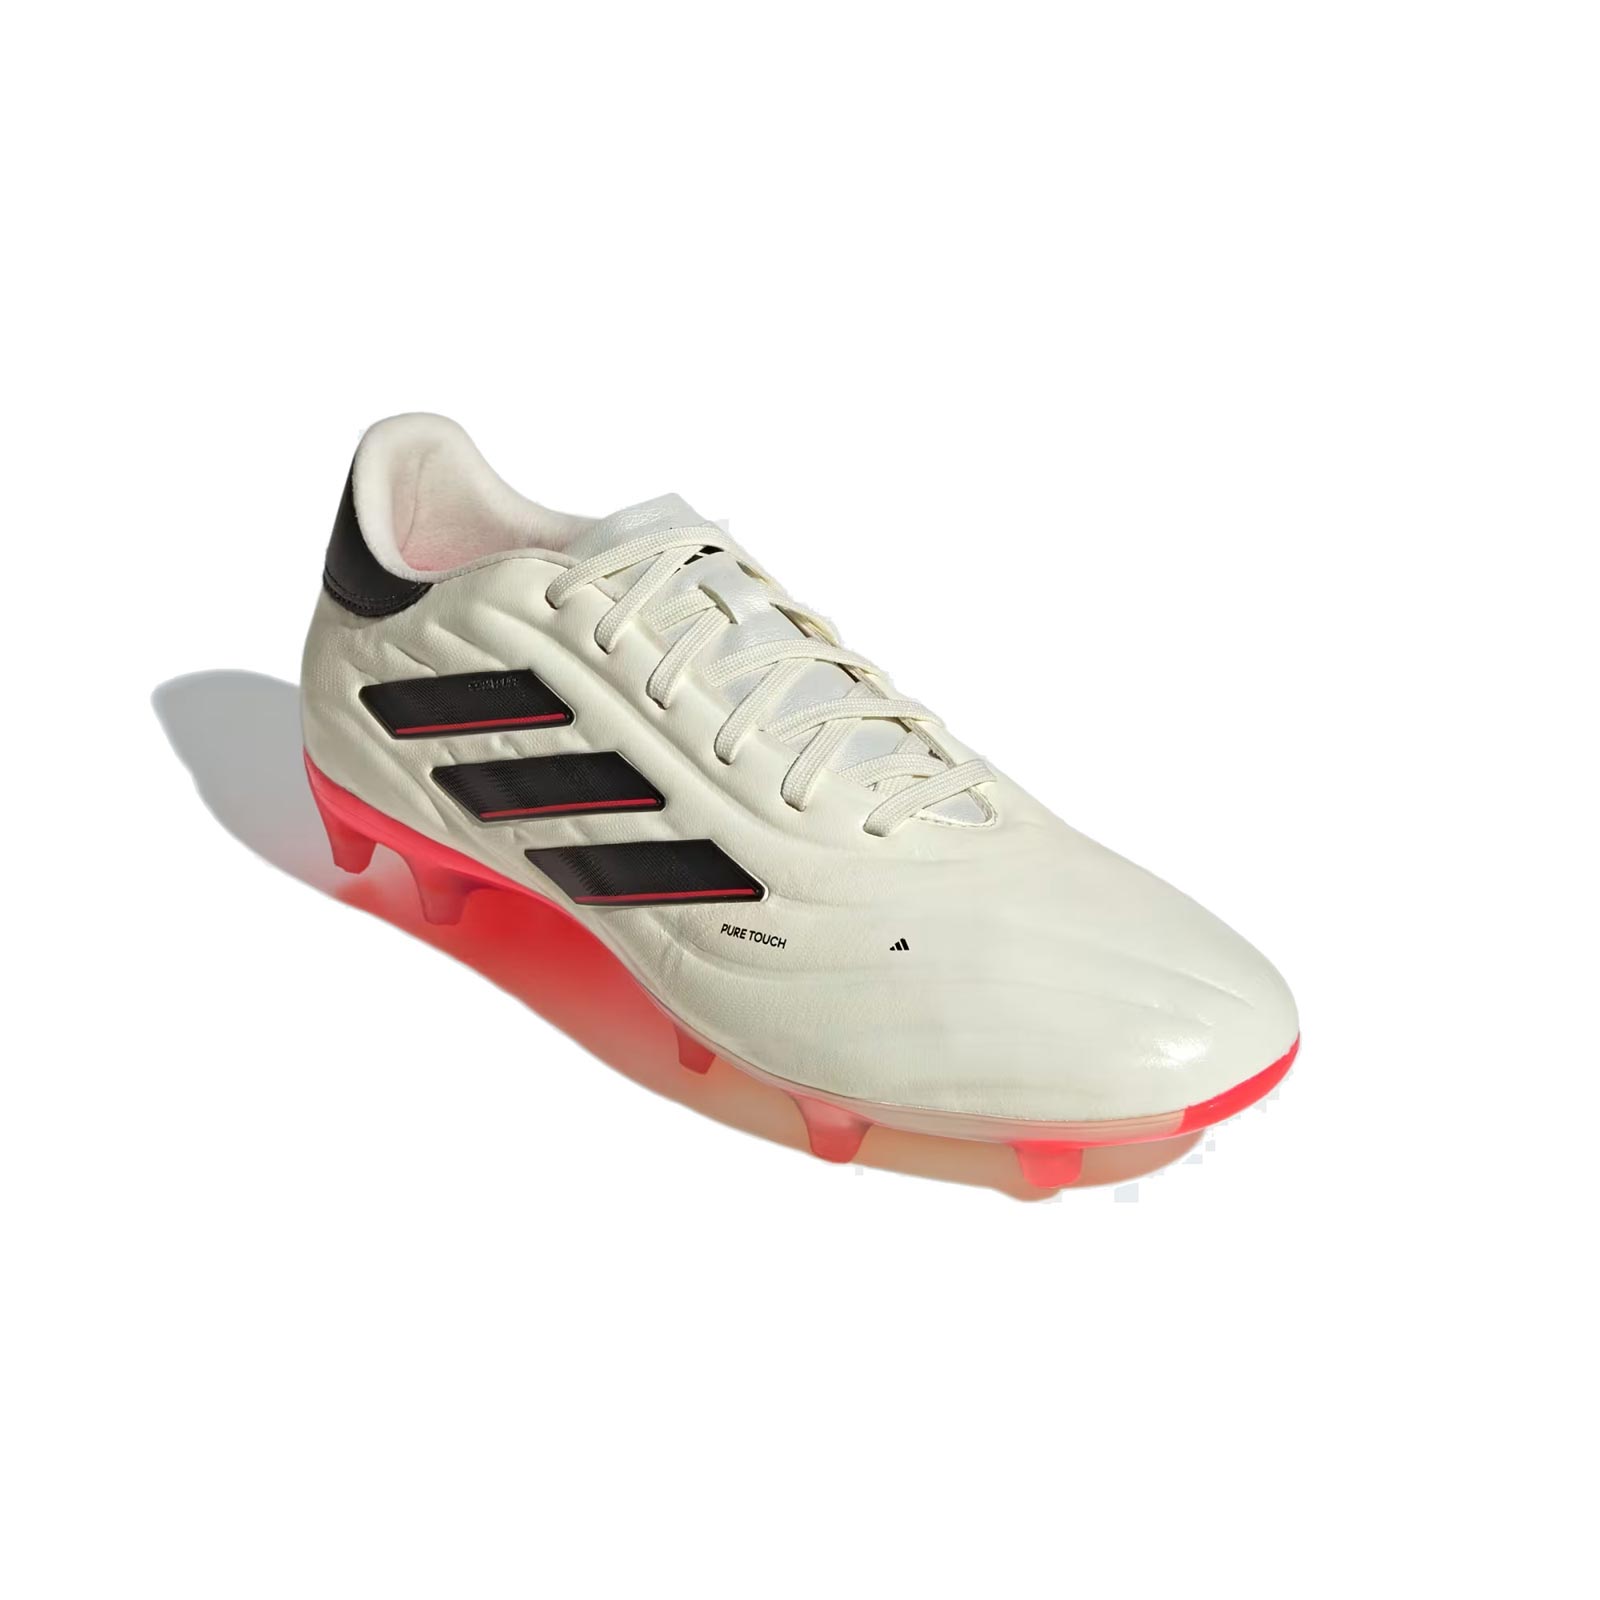 adidas Copa Pure II Pro Firm-Ground Football Boots